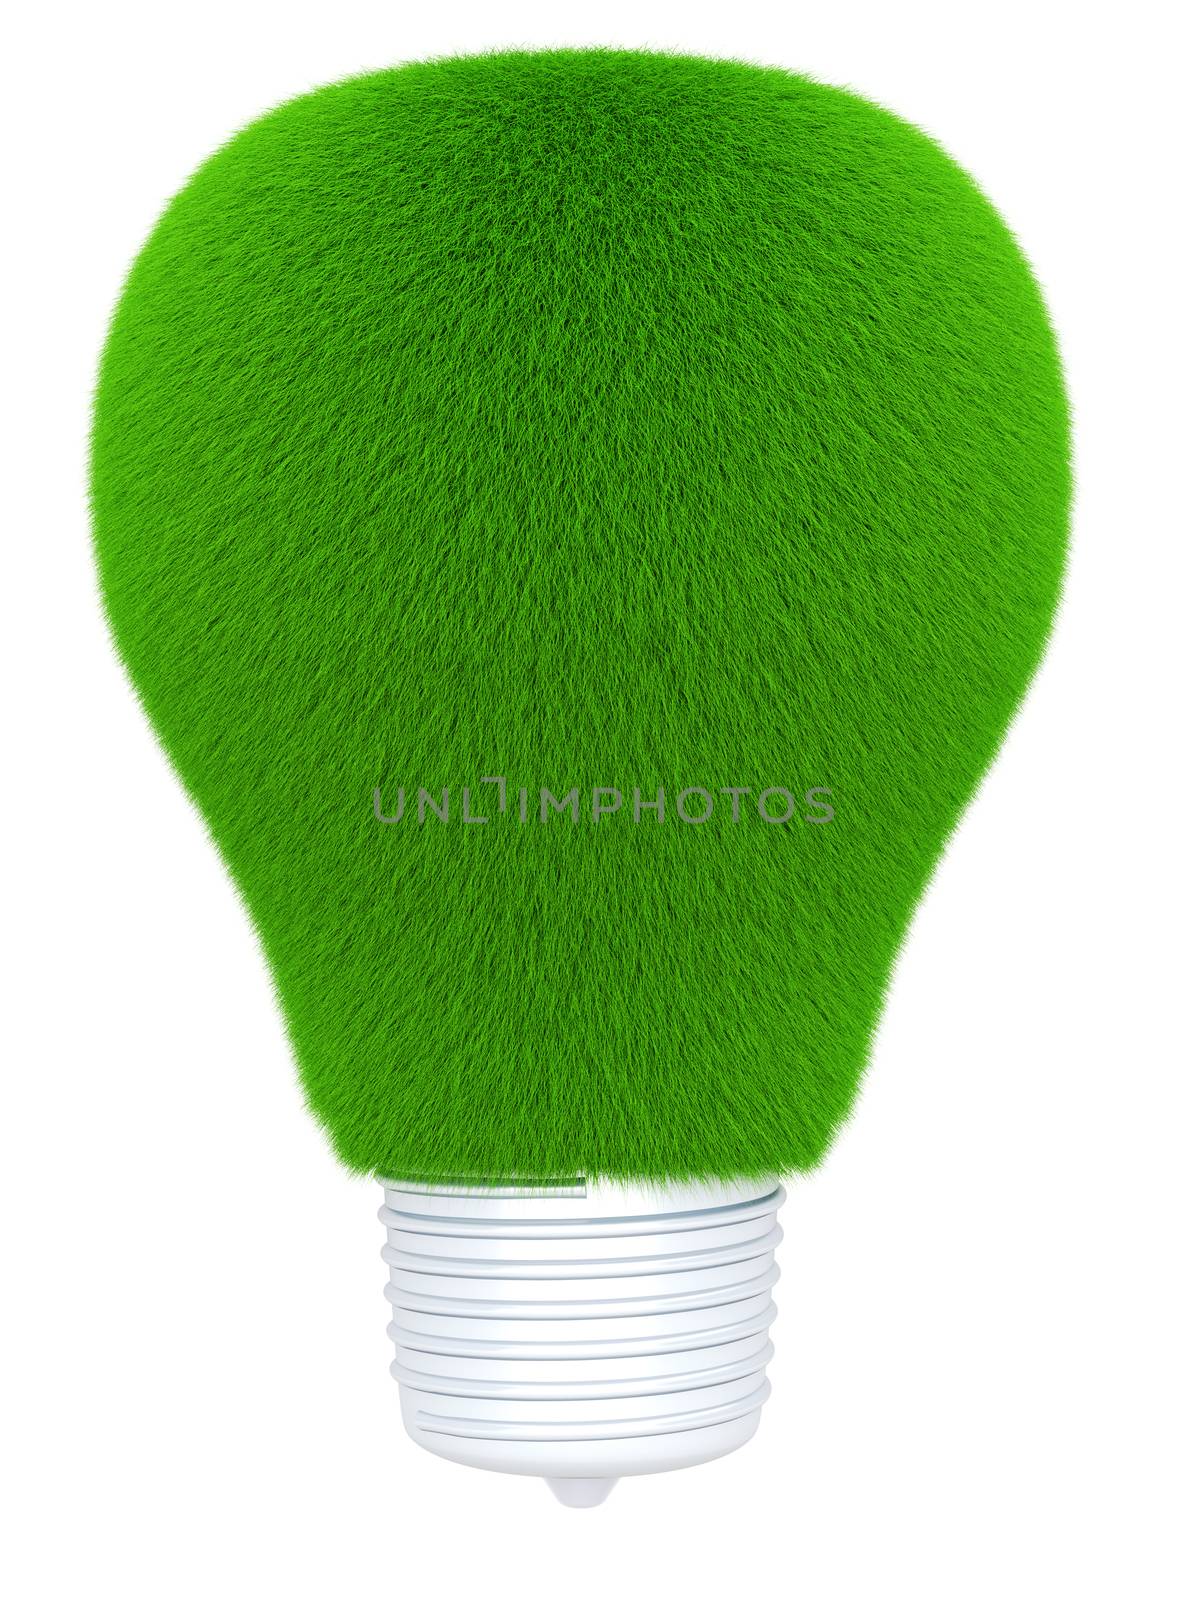 Grass growing on a light bulb. Symbol for green energy. 3d Illustration.